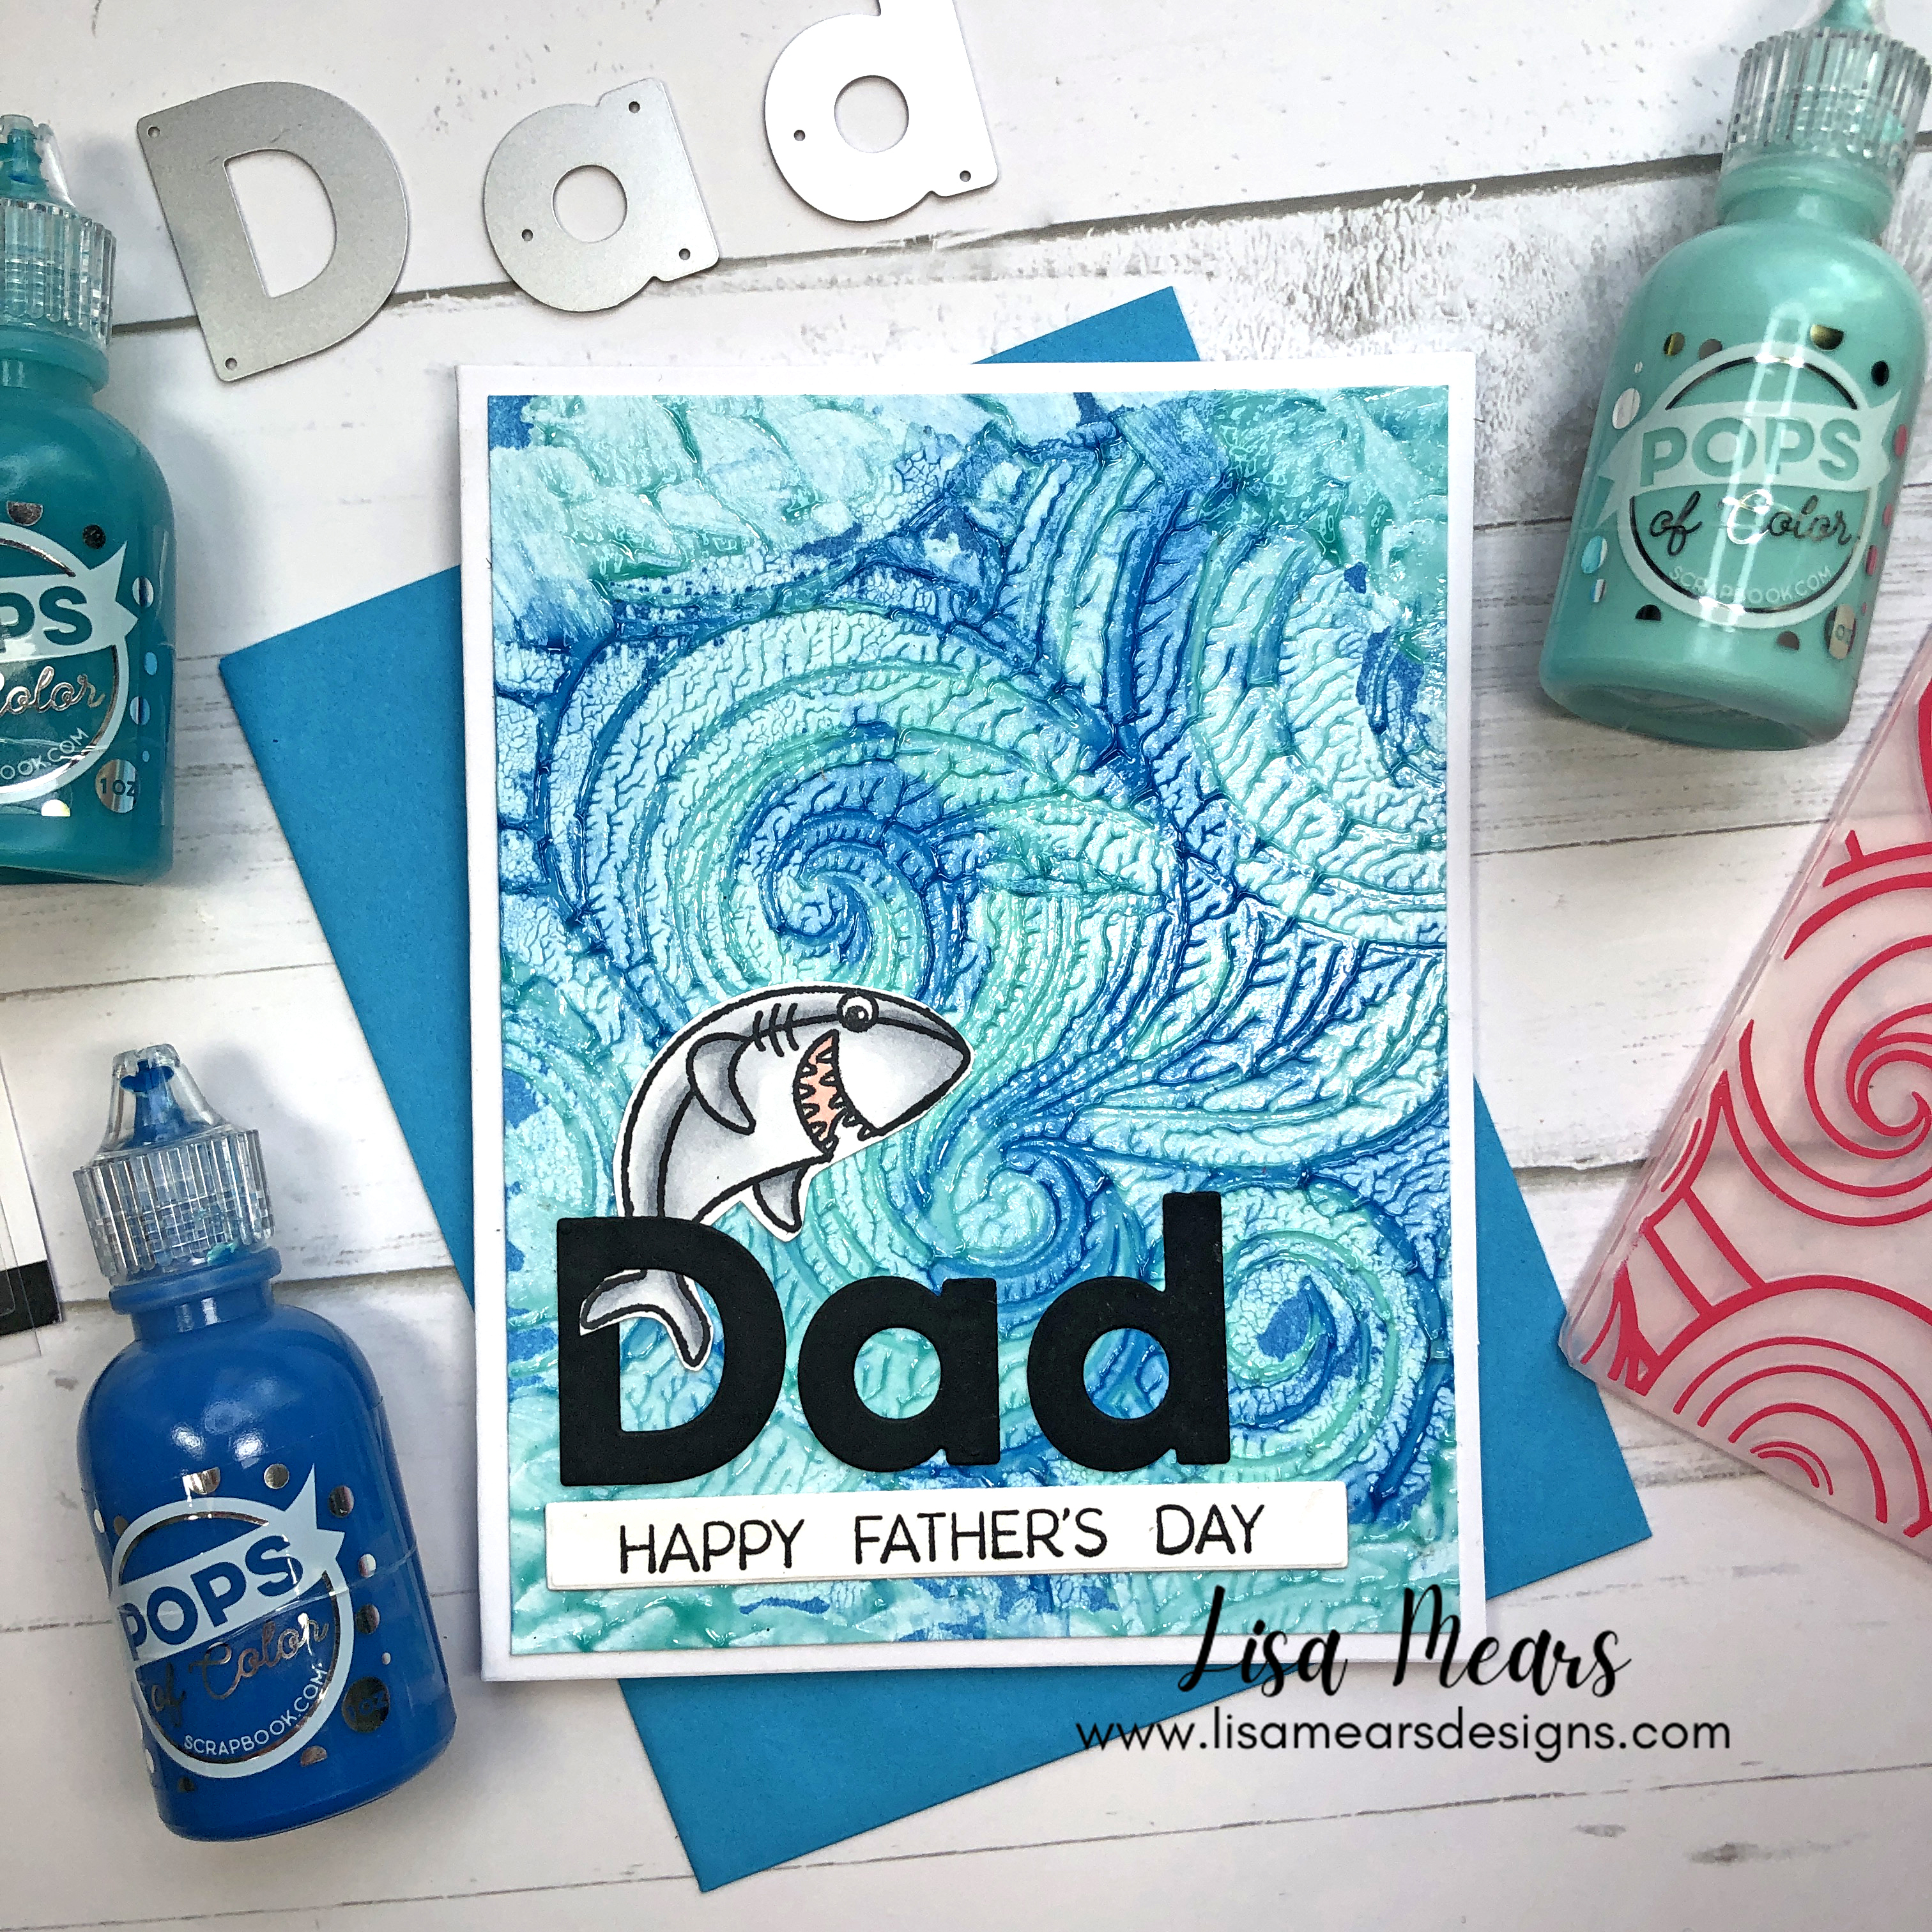 Scrapbook.com Pops of Color - Parade for Pops - Using Pops of Color in Various Ways | Father's Day Handmade Card | Dad Card with Shark